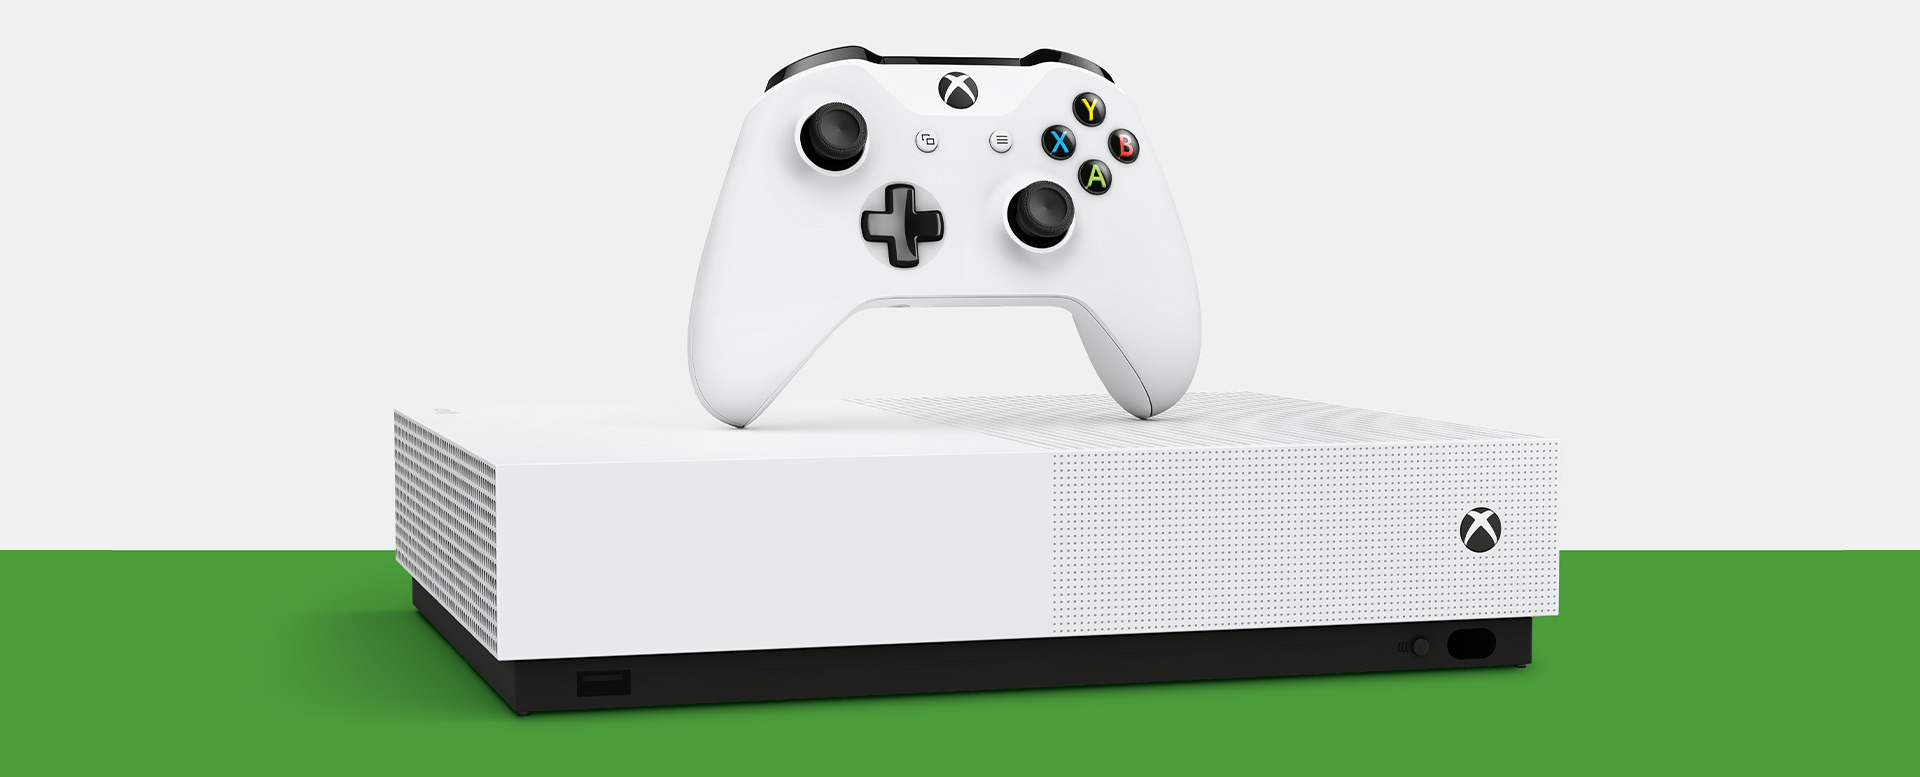 reviews on xbox one s all digital